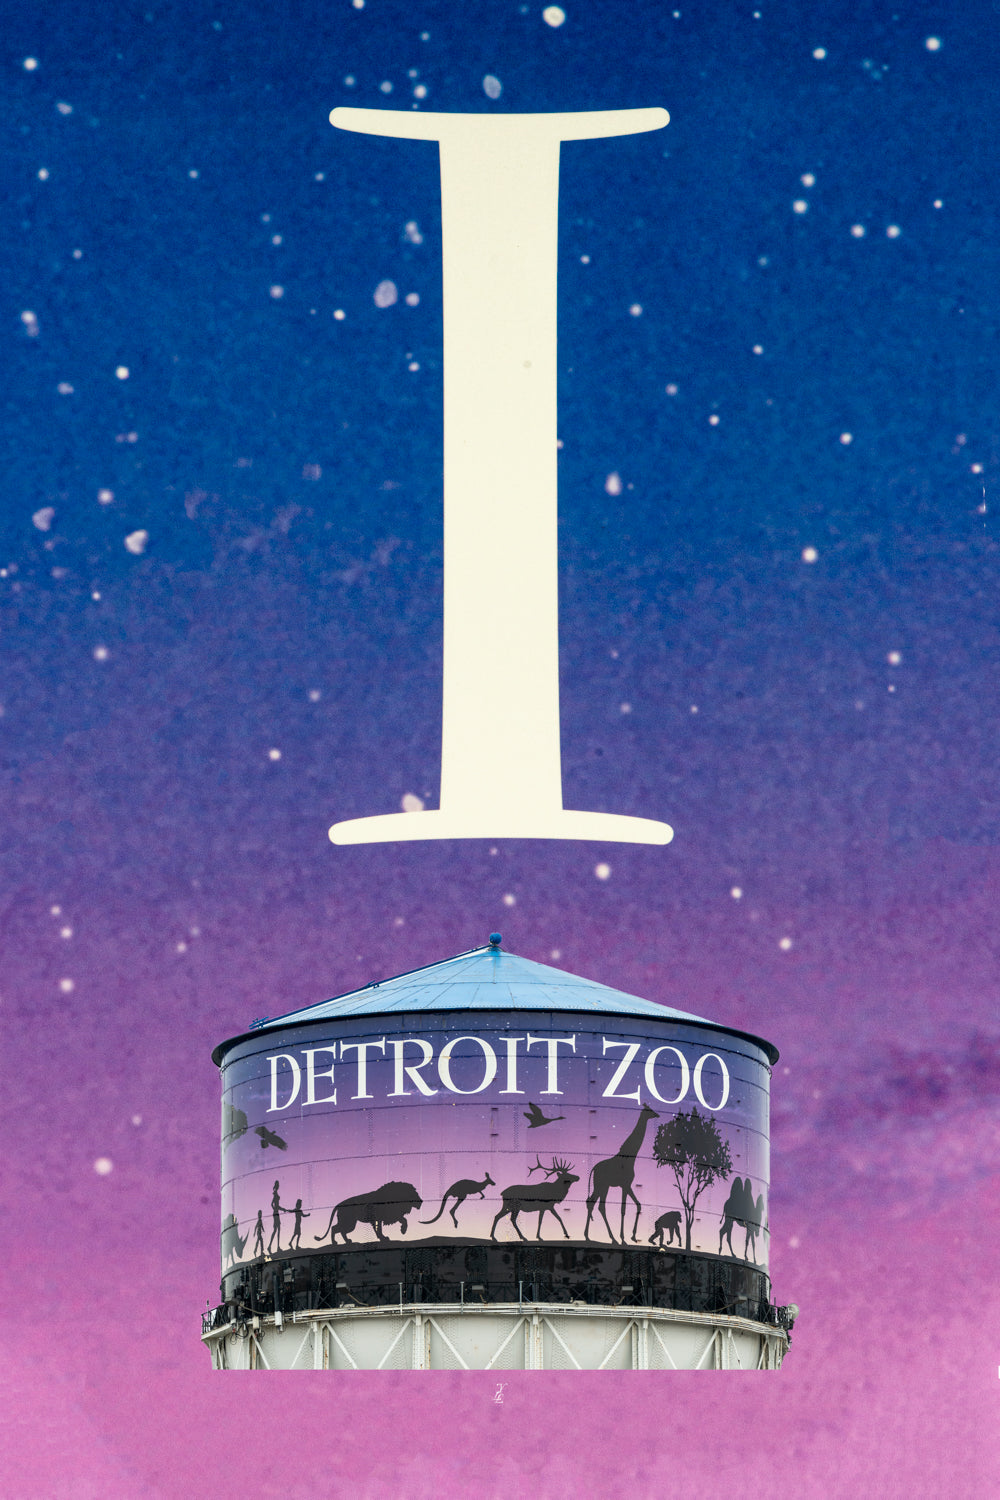 Your Life Letters (YLL) are unique photo letter art from Royal Oak, Michigan that answers the question, "where was this taken?". This letter is the I from the Detroit Zoo Water Tower. Each YLL from A to Z is taken at a location that has memory for the customer and is shown in the upper two thirds of the photo. The sign the letter was taken from is represented in the lower one third of the photo.